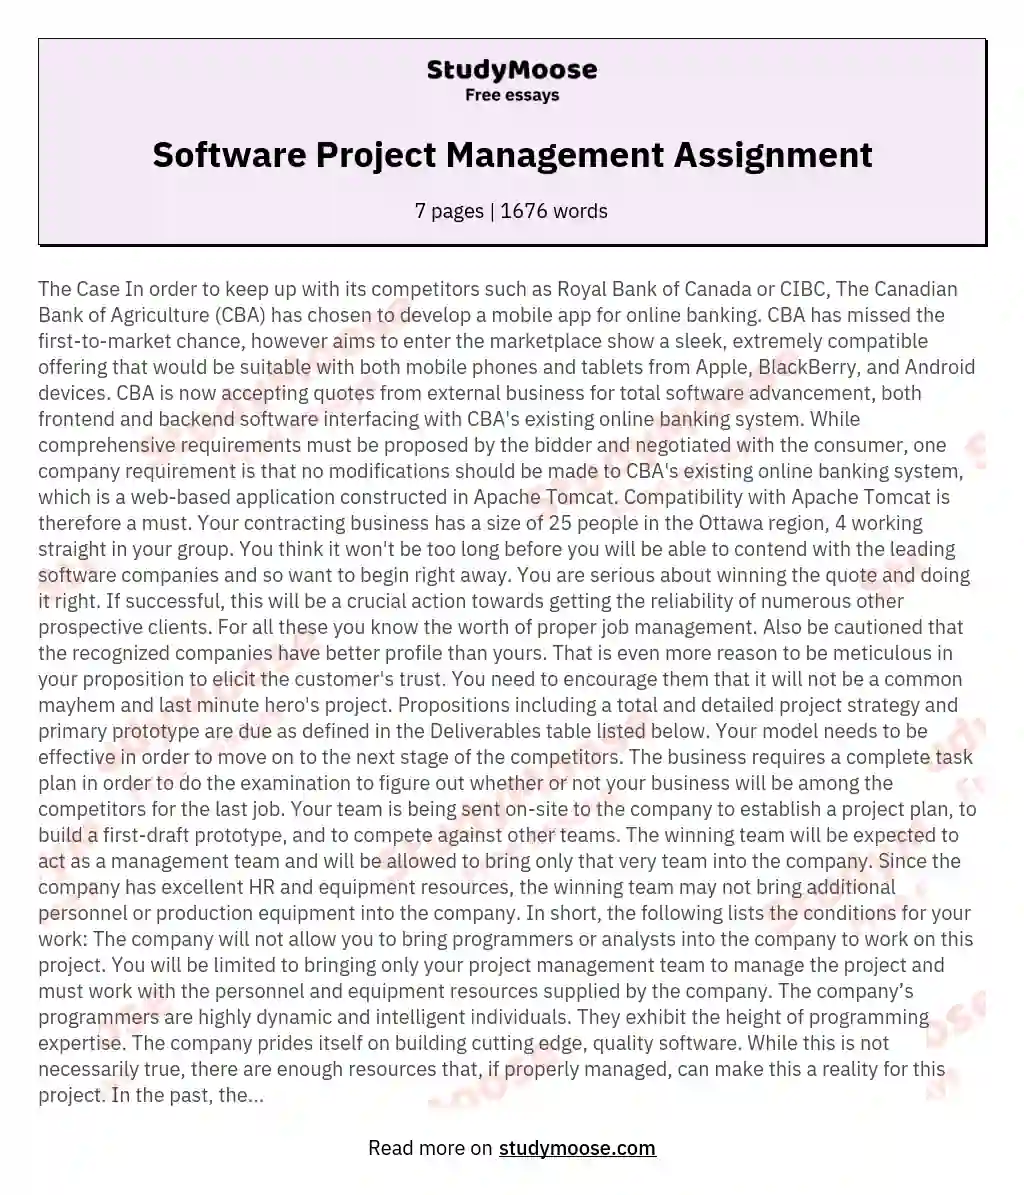 Software Project Management Assignment essay